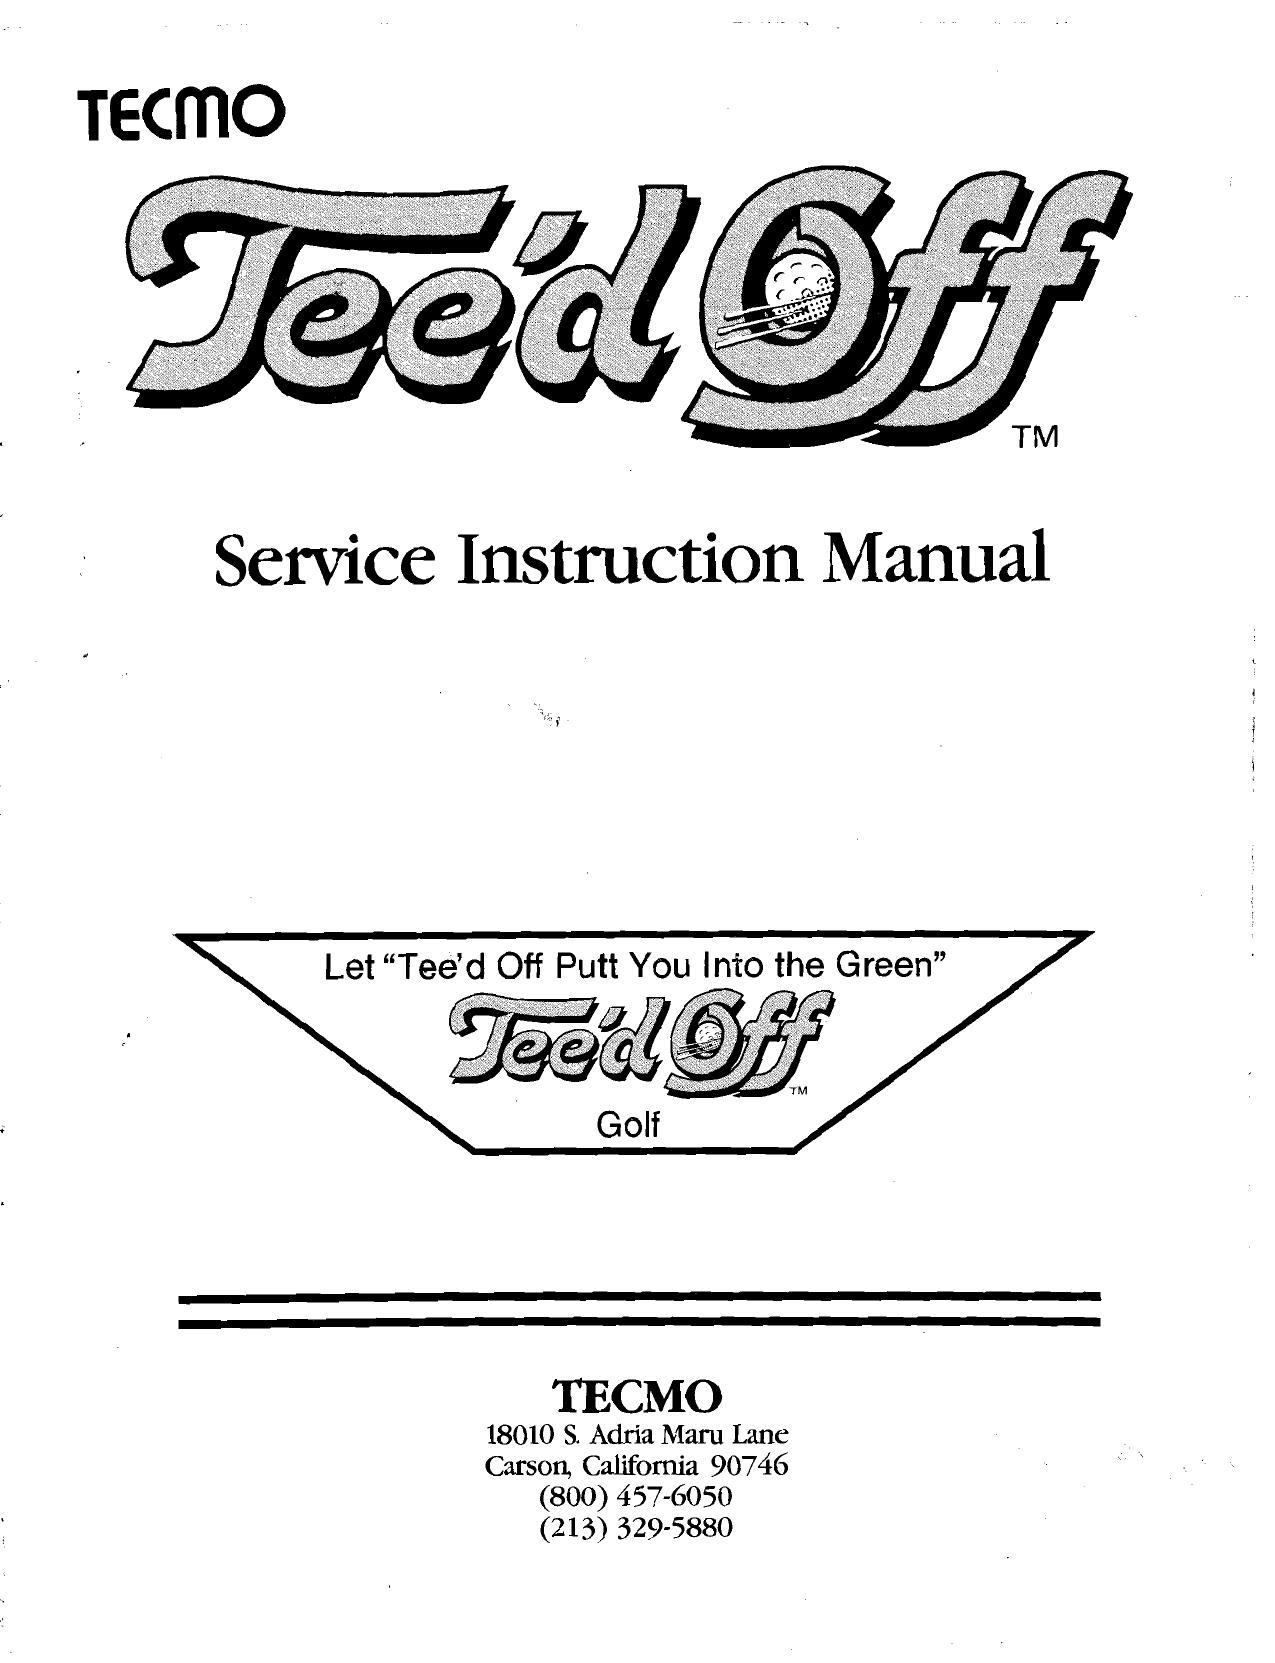 Tee'd Off Service Instruction Manual